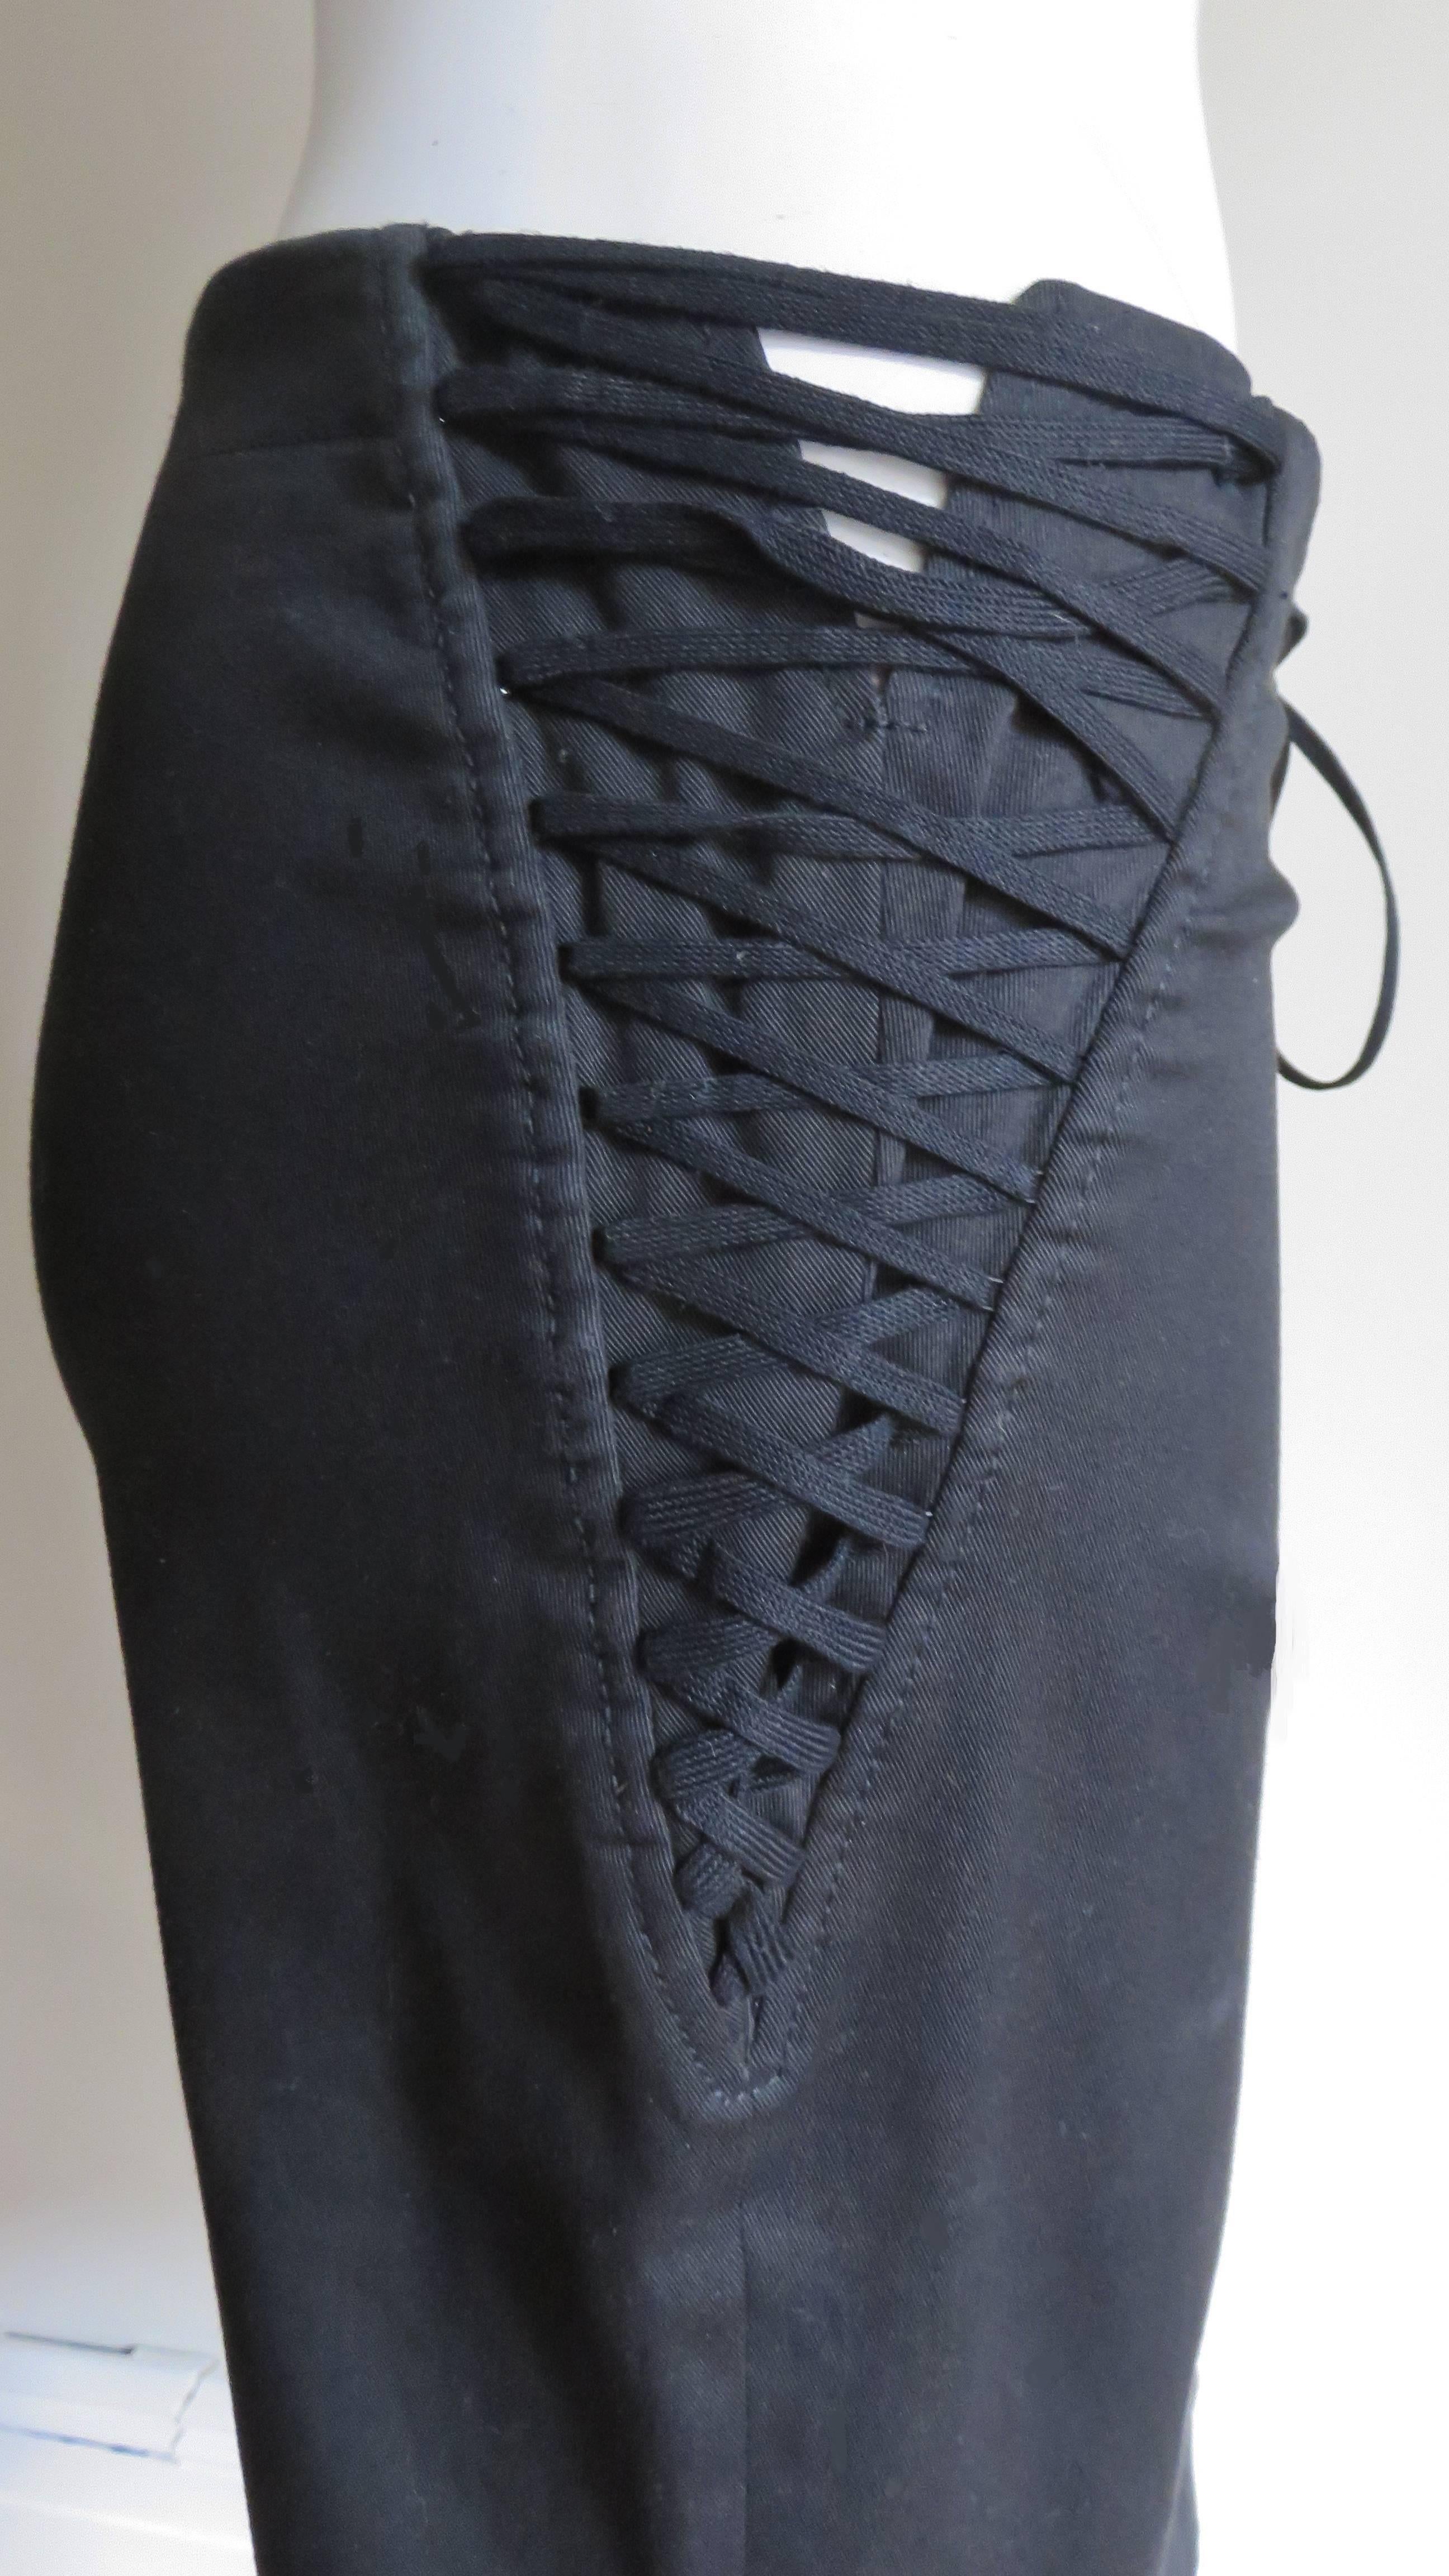 Dolce & Gabbana Lace Up Skirt In Good Condition For Sale In Water Mill, NY